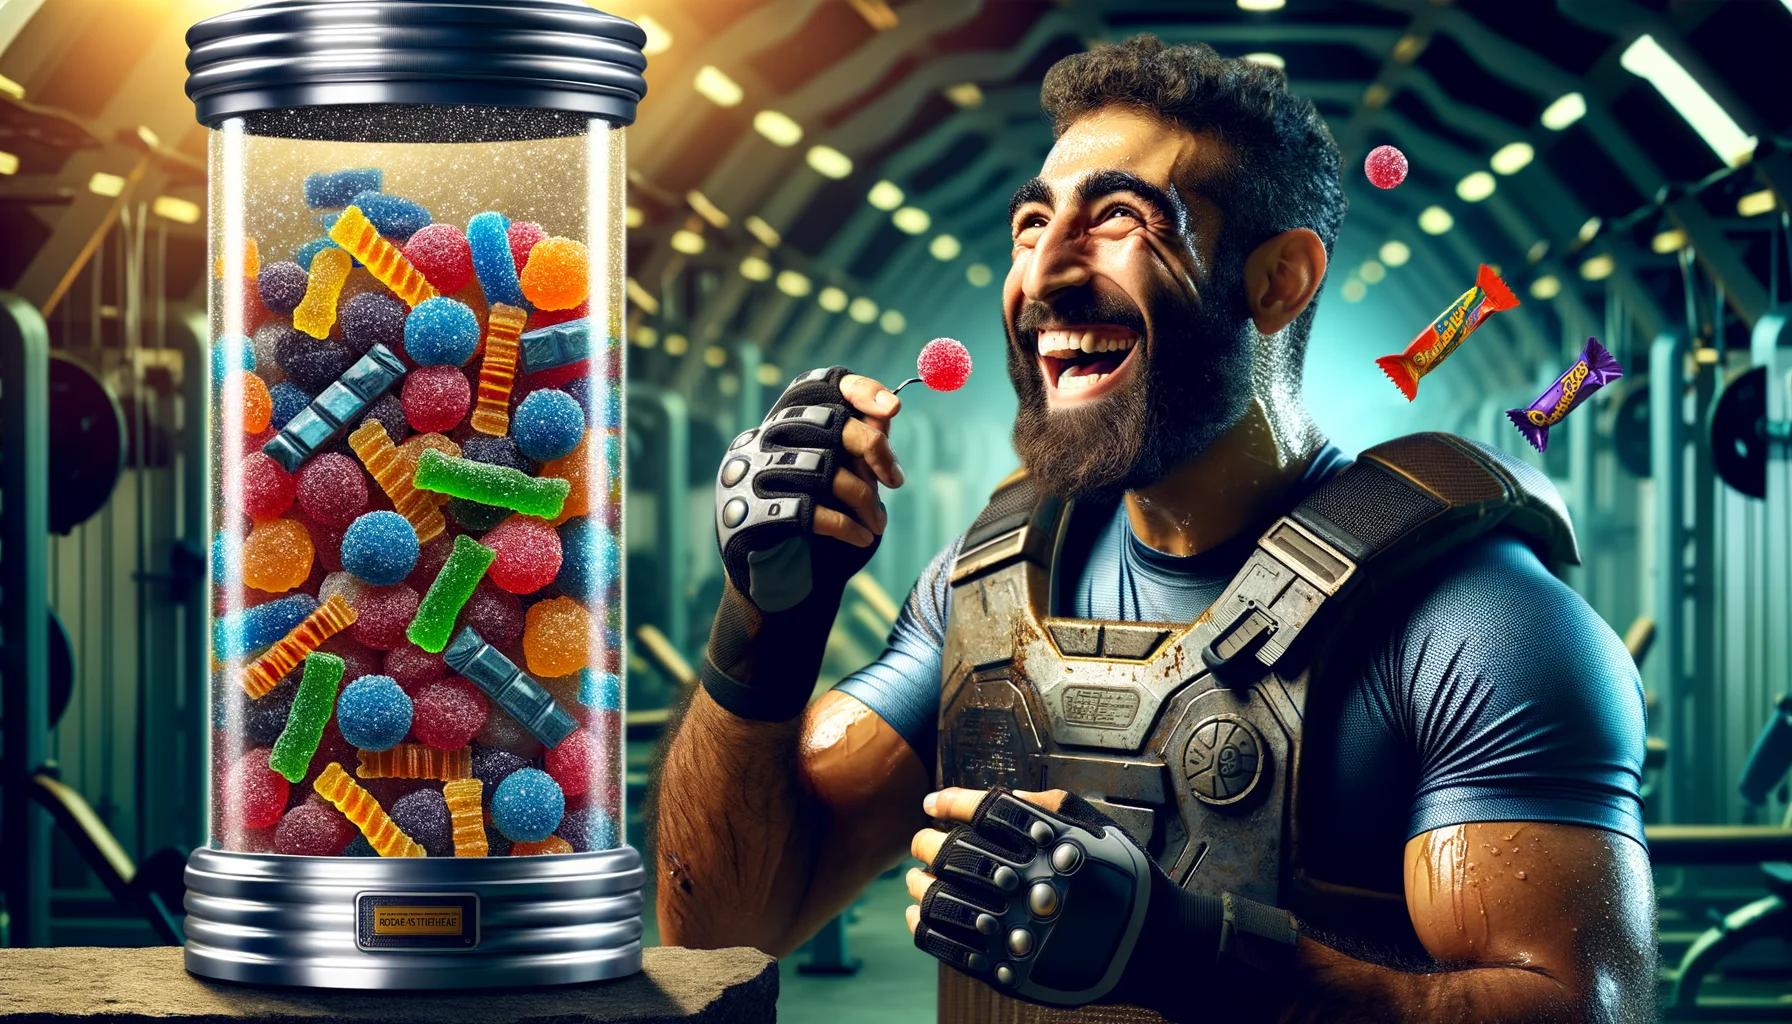 Imagine a laugh-inducing scene where a Middle-Eastern male athlete is finishing up his intense workout in a well-equipped gym. He's radiating with sweat, realism encapsulating the scene, weightlifting gloves still on. Instead of reaching for a protein shake, he opens a glittering, oversized, colourful candy jar filled with a variety of delicious gummy candies and chocolate bars. His gleeful face contrasts with the seriousness of his muscular physique, and the surrounding gym environment.